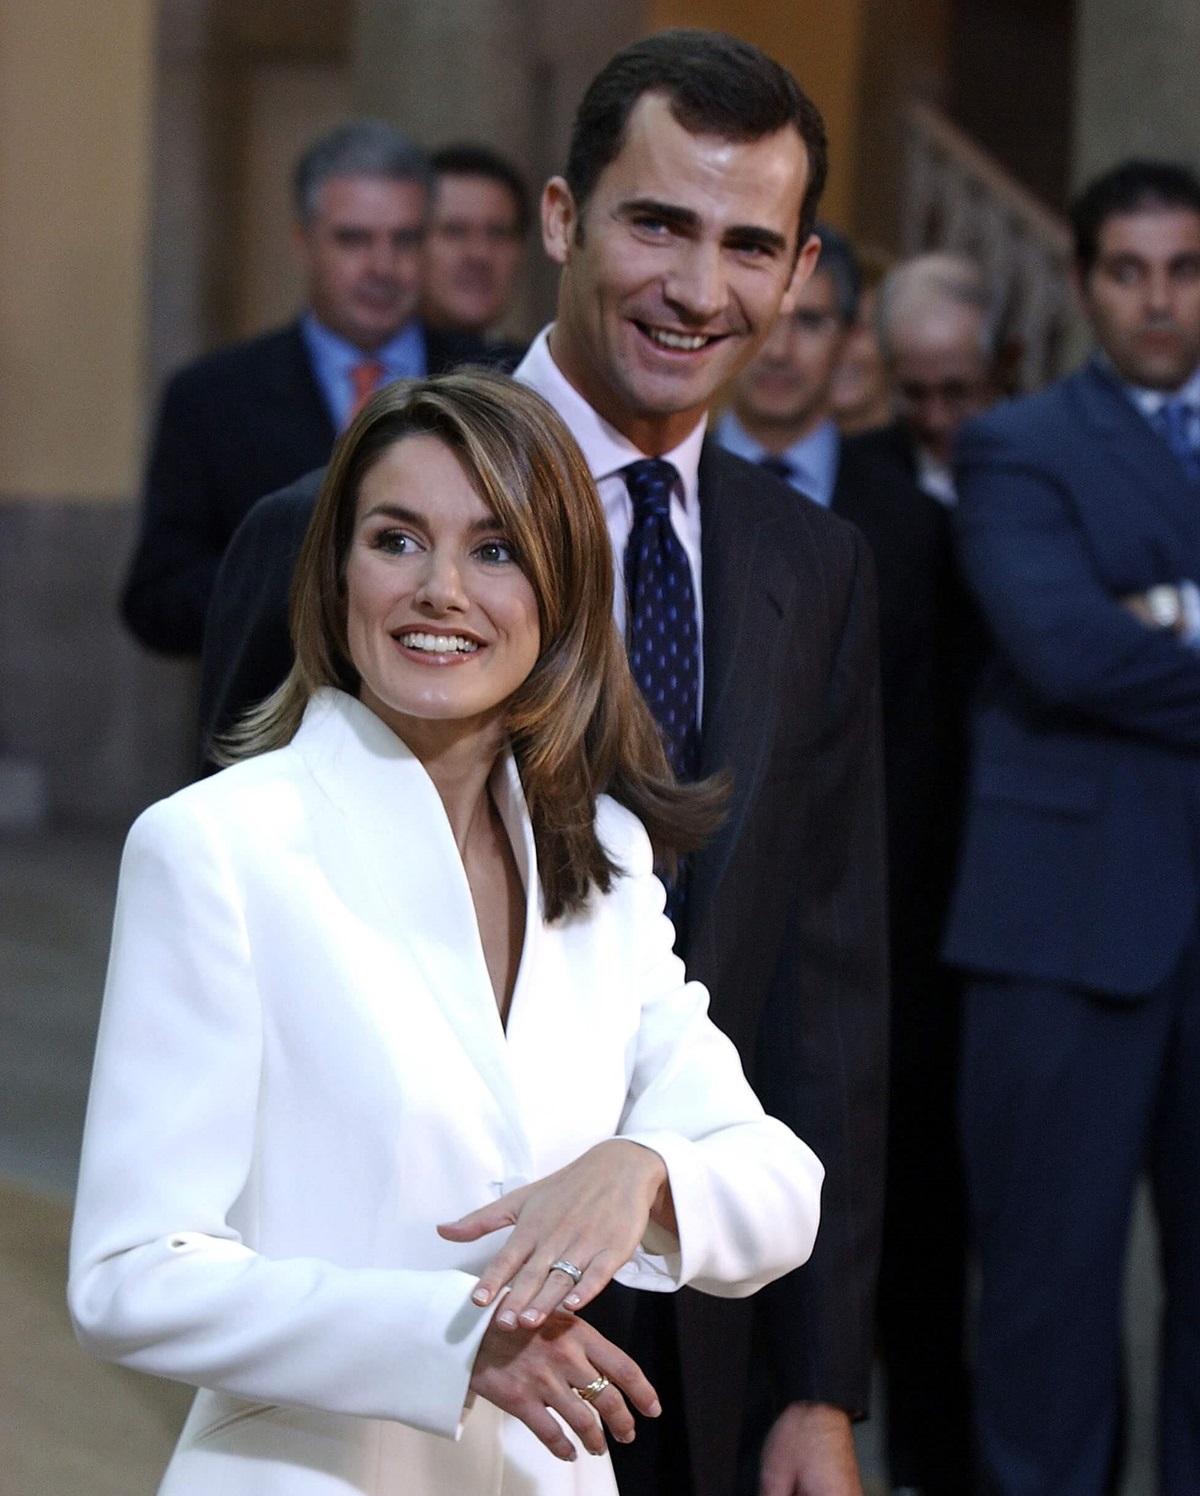 Then-Prince Felipe of Spain and Letizia Ortiz Rocasolano pose during an official engagement ceremony at the garden of El Pardo Palace 